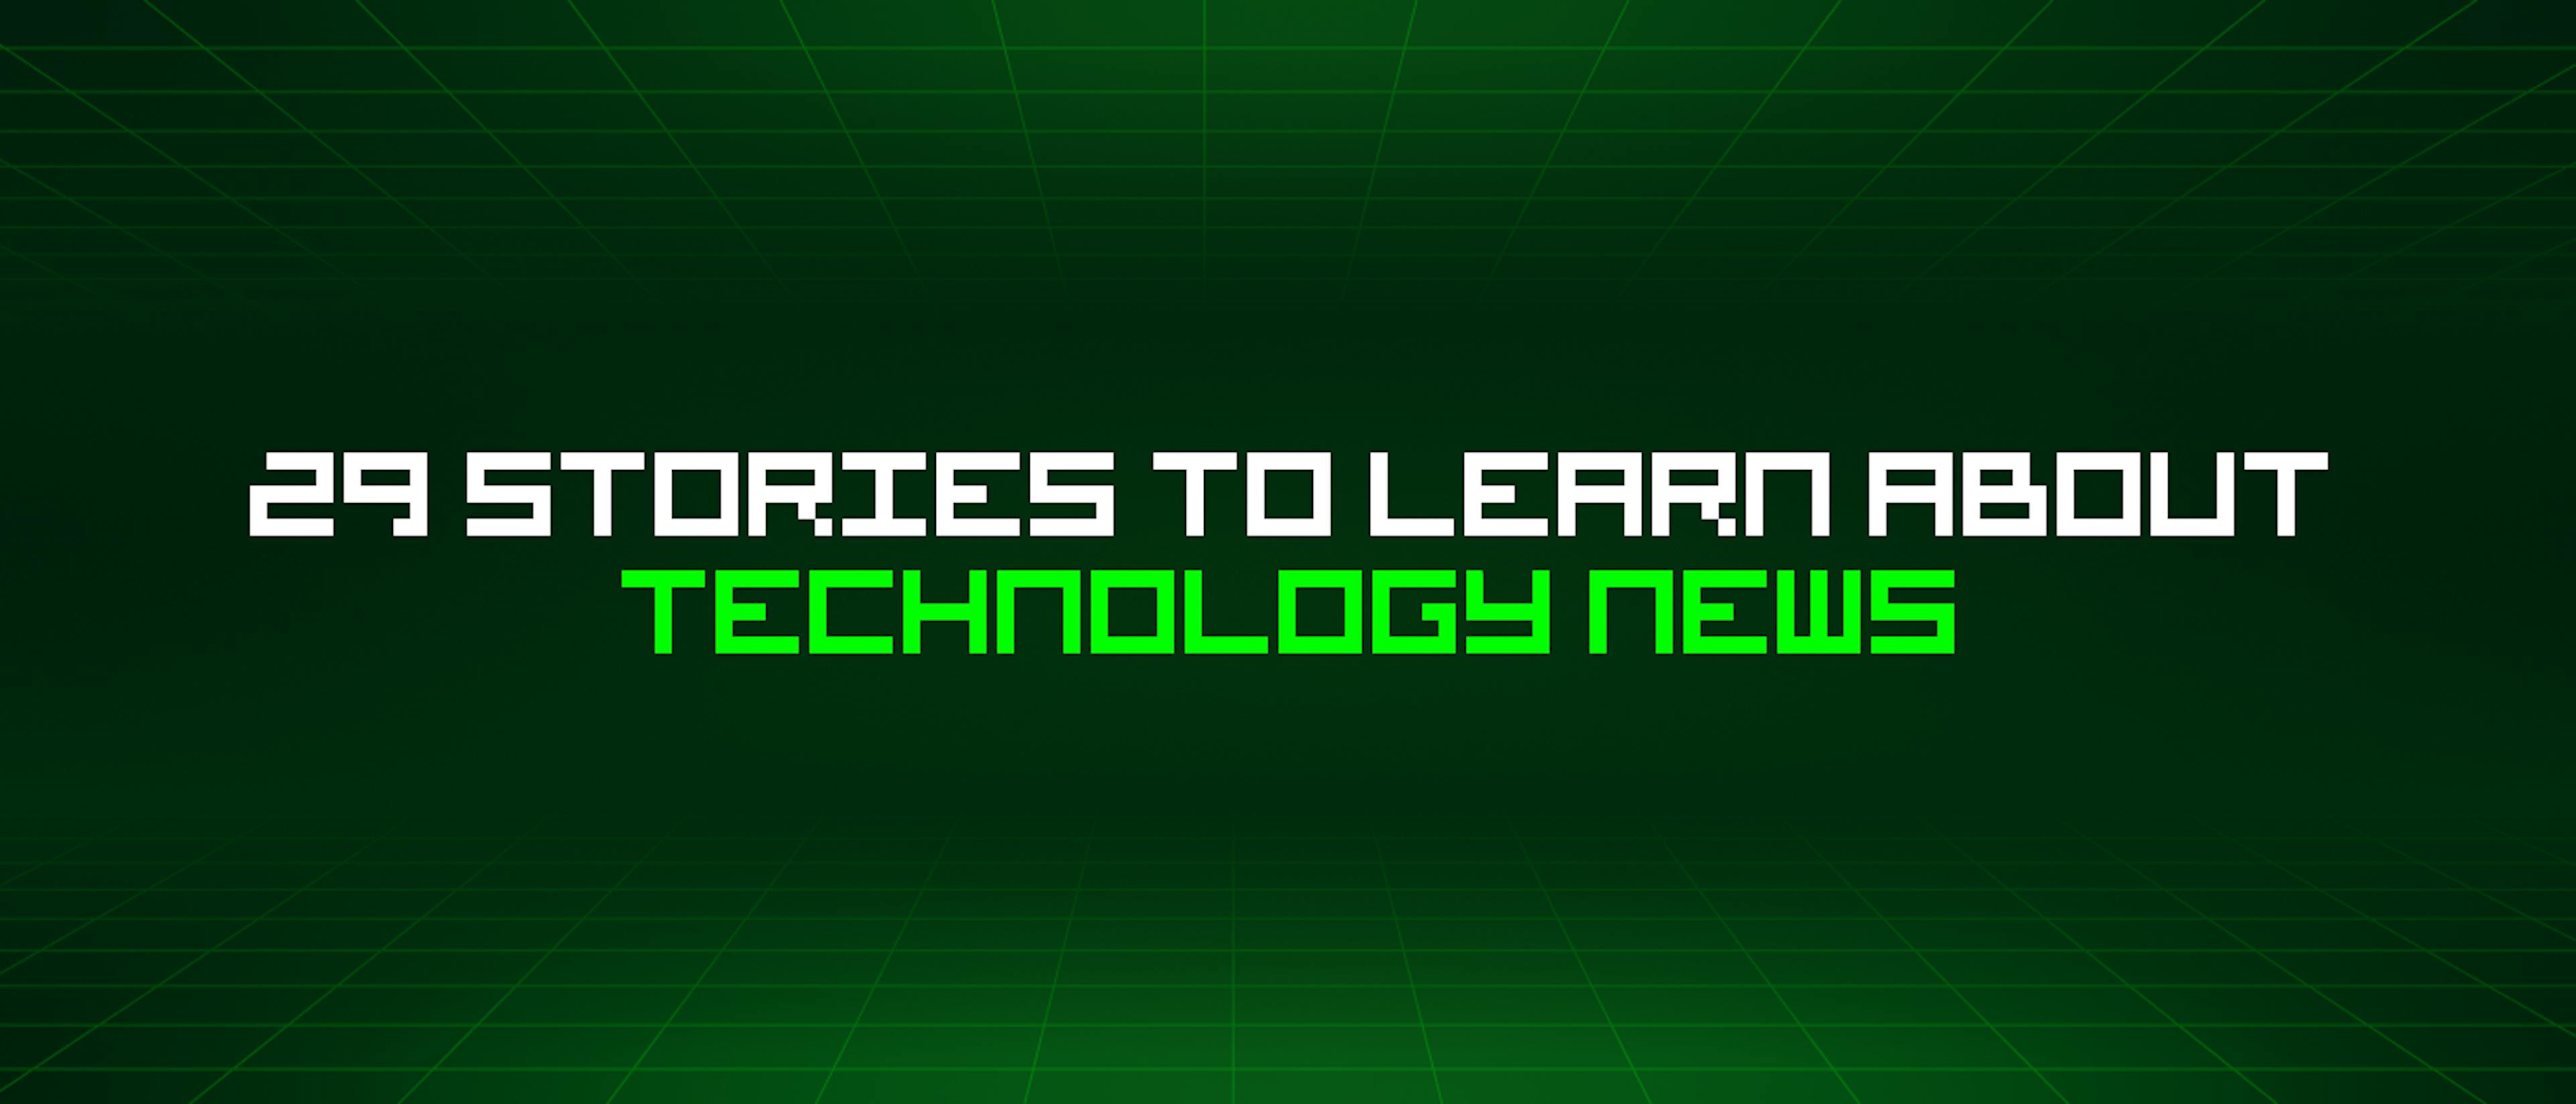 featured image - 29 Stories To Learn About Technology News